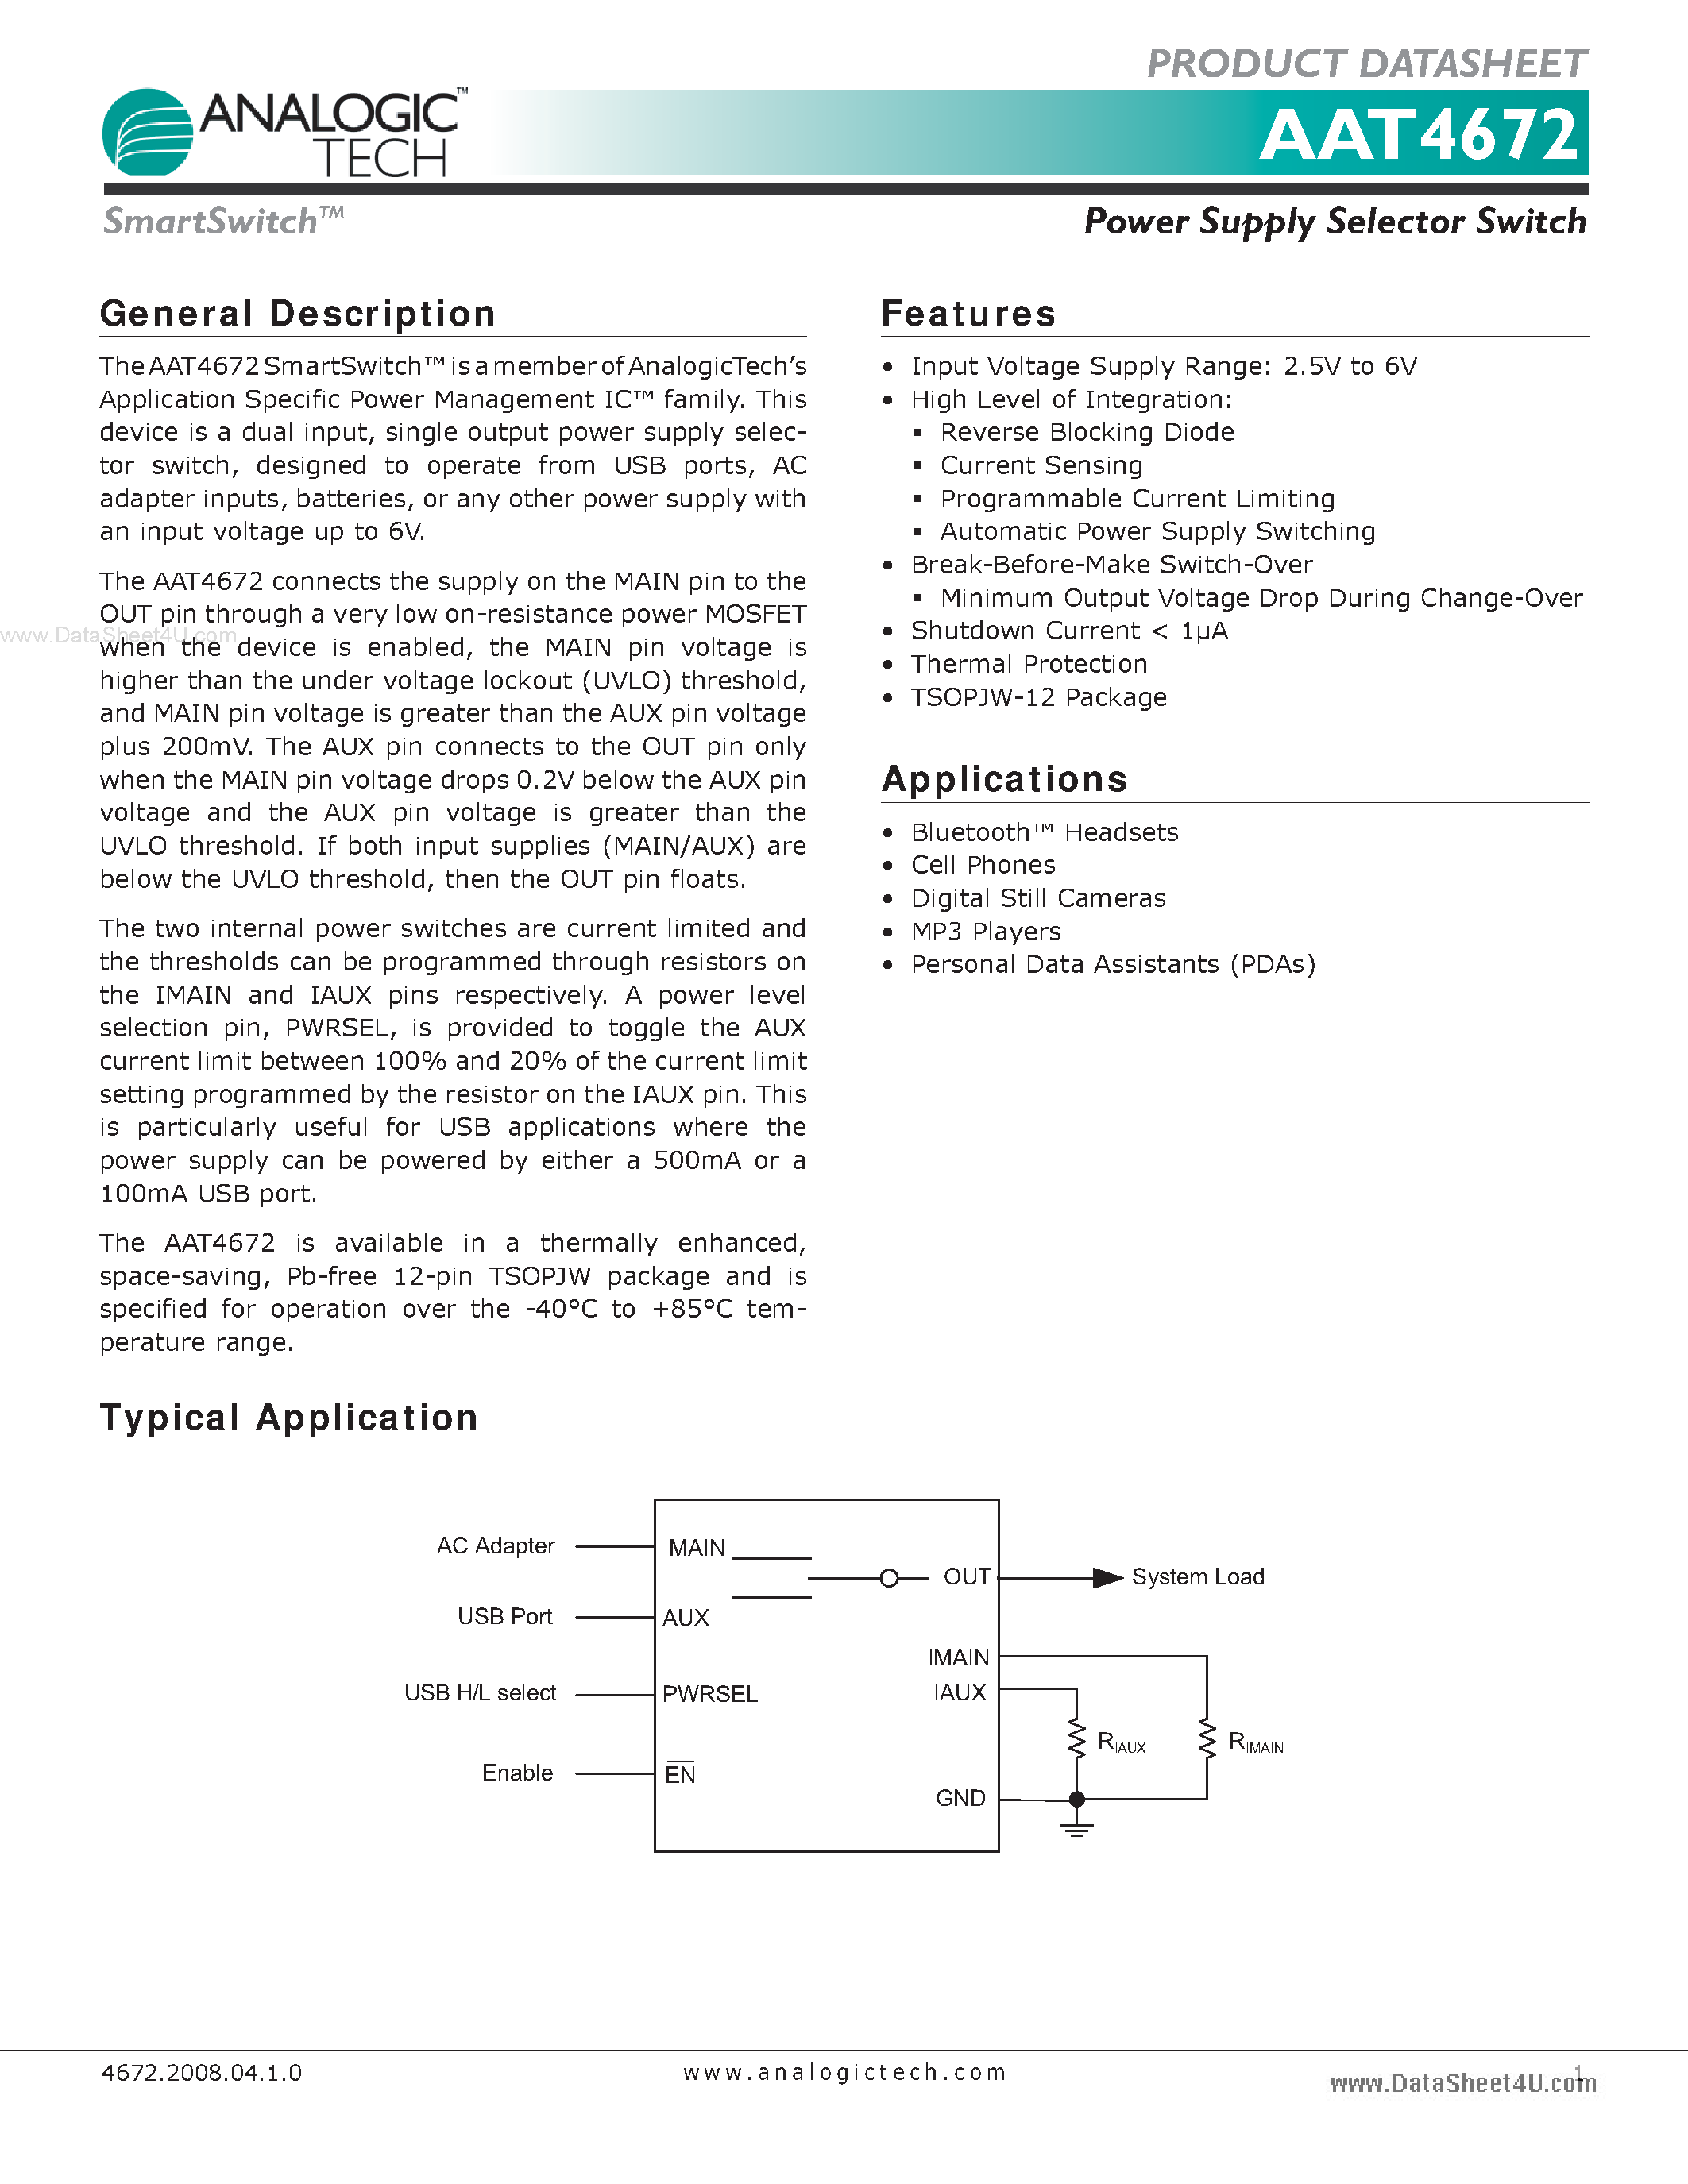 Datasheet AAT4672 - Power Supply Selector Switch page 1